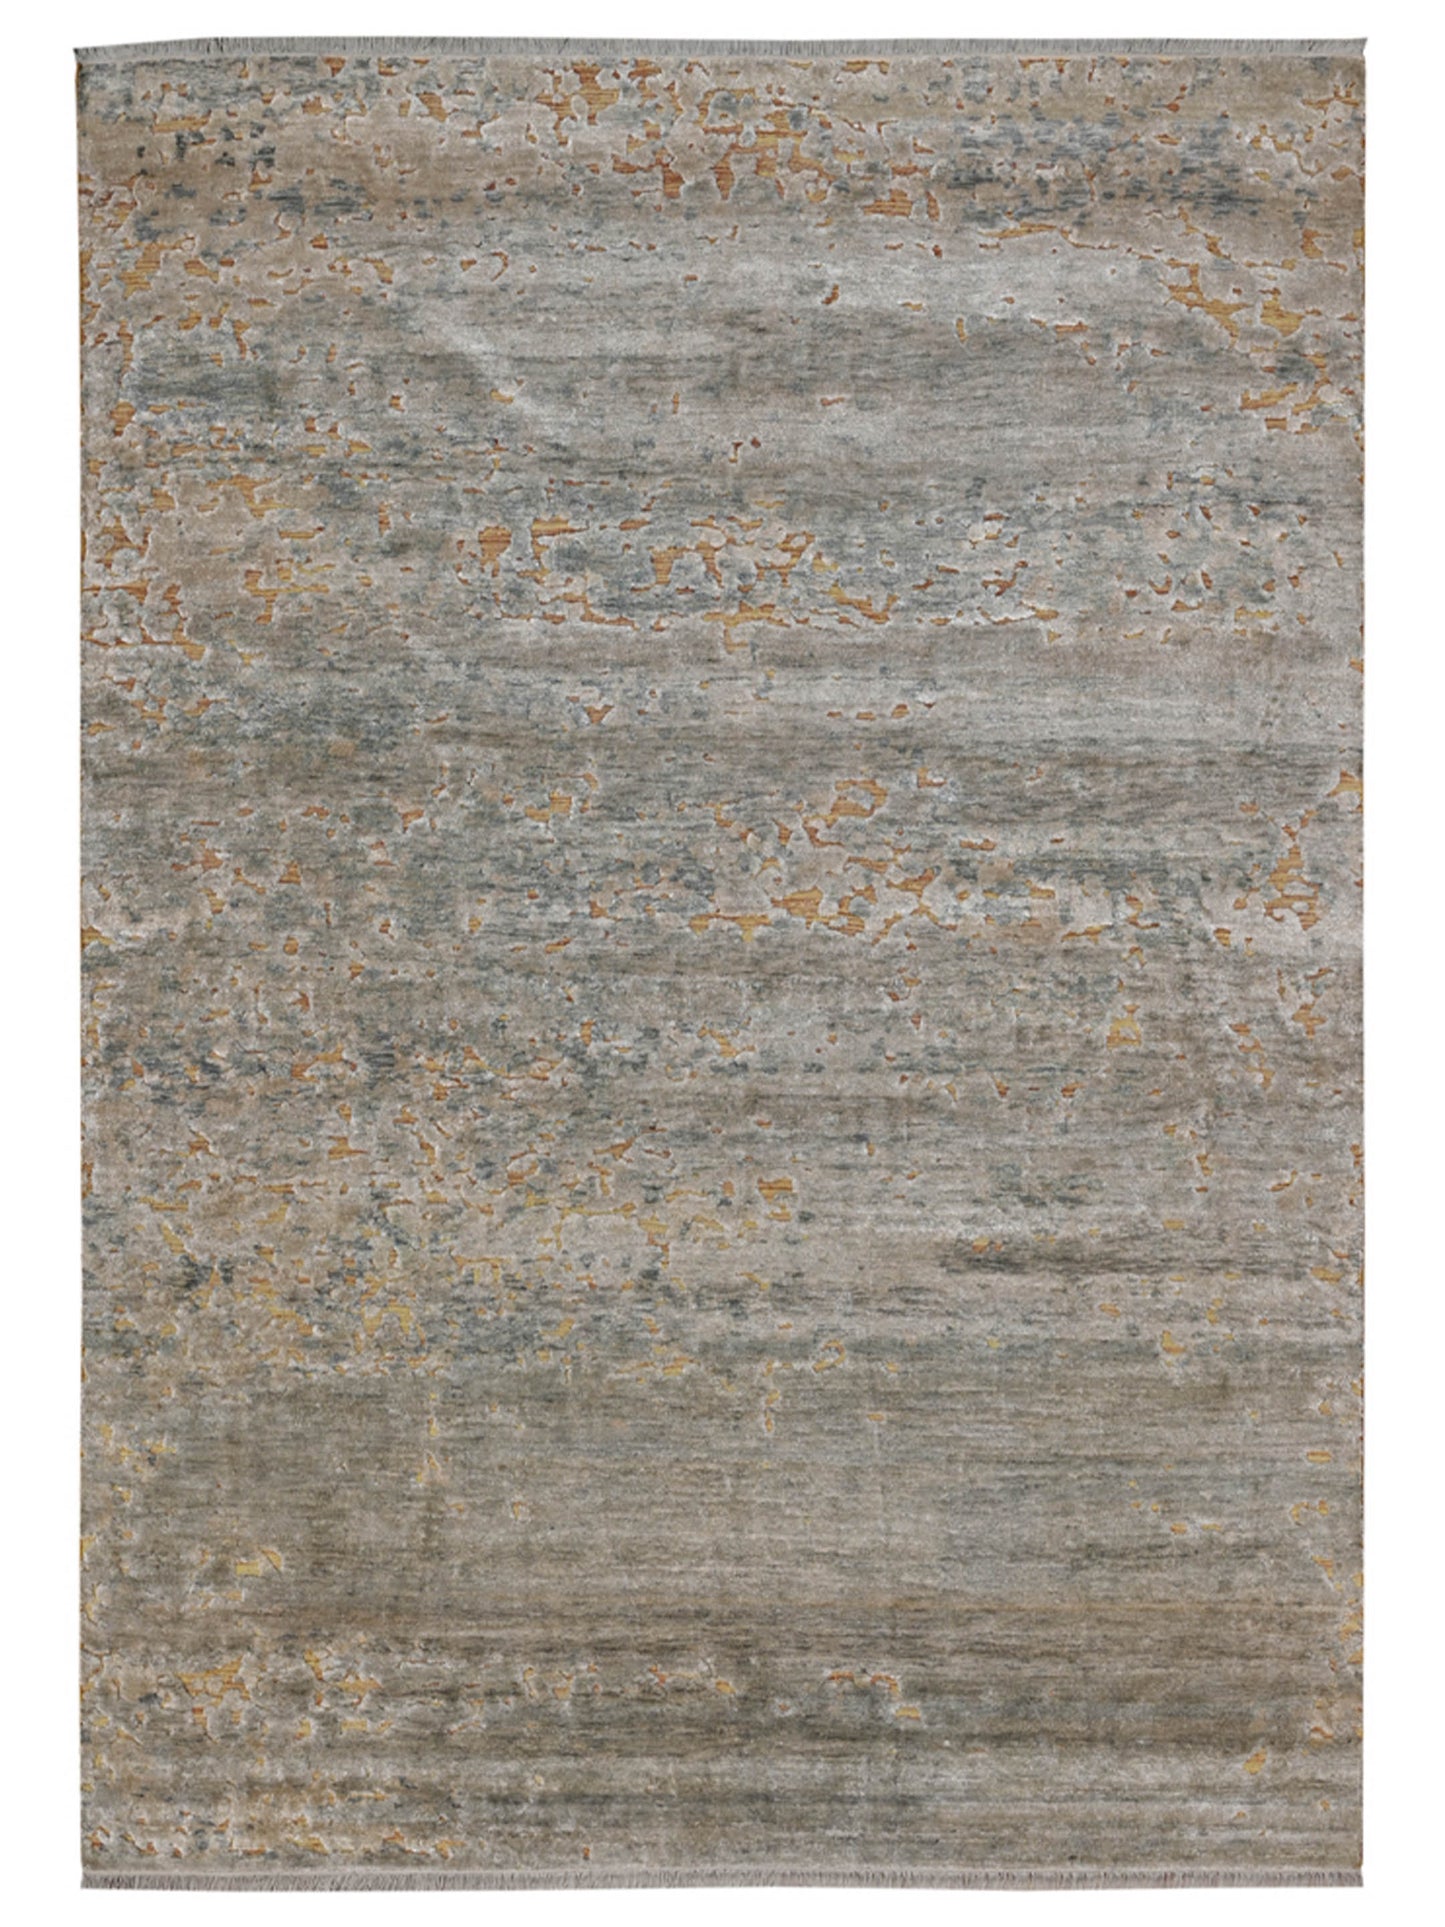 Artisan Mary 3D-2 Gold Contemporary Knotted Rug